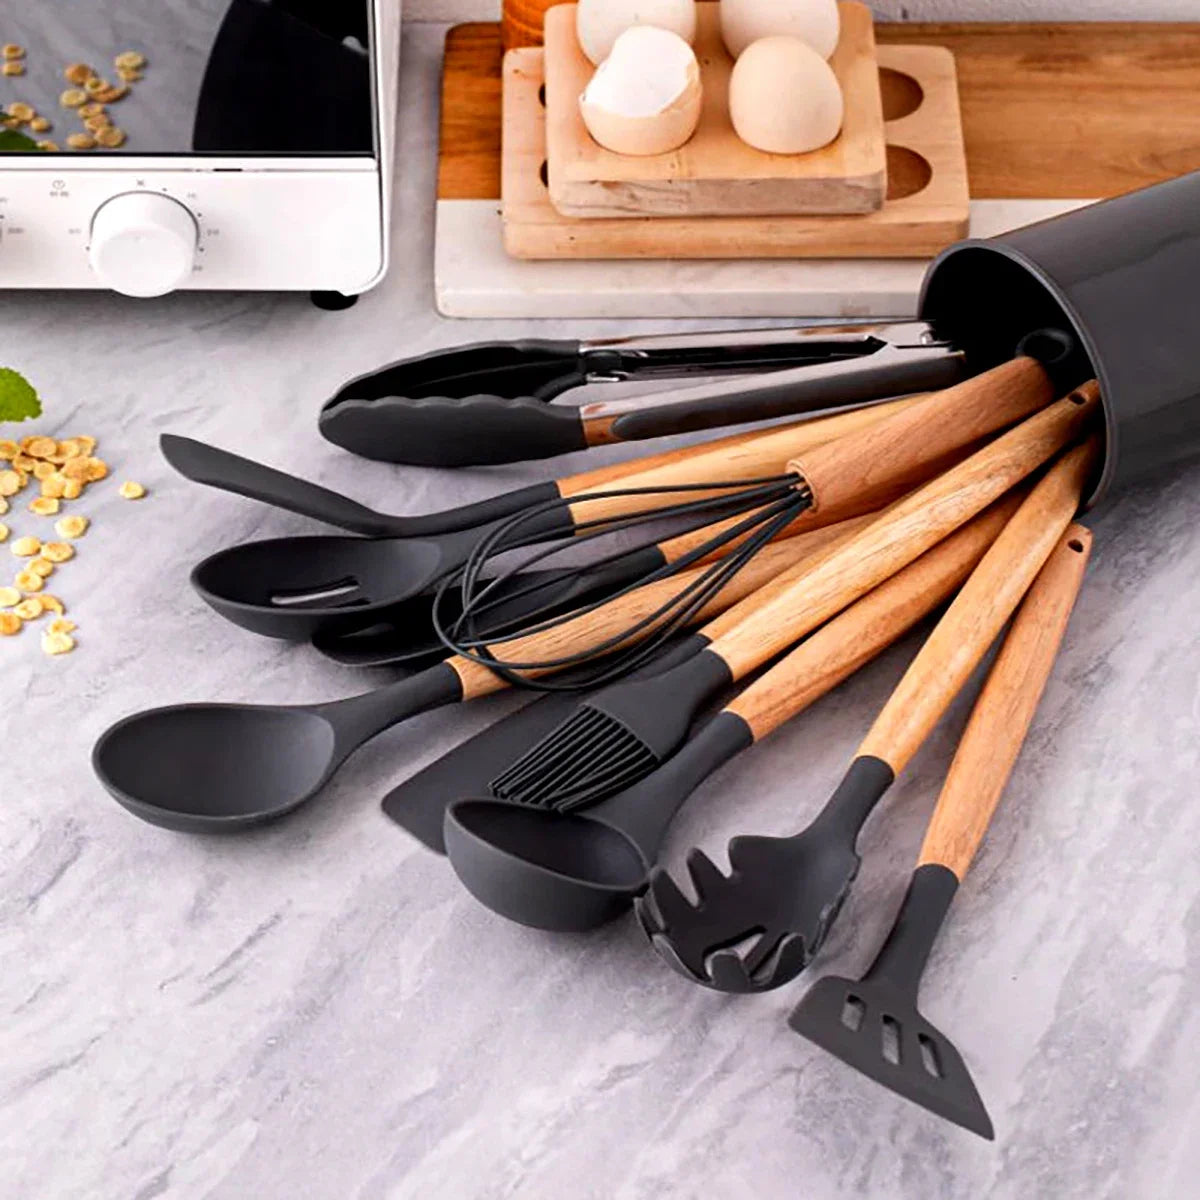 12-Piece Kitchen Silicone Cooking Utensils Set for Non-Stick Cookware, Heat-Resistant Accessories